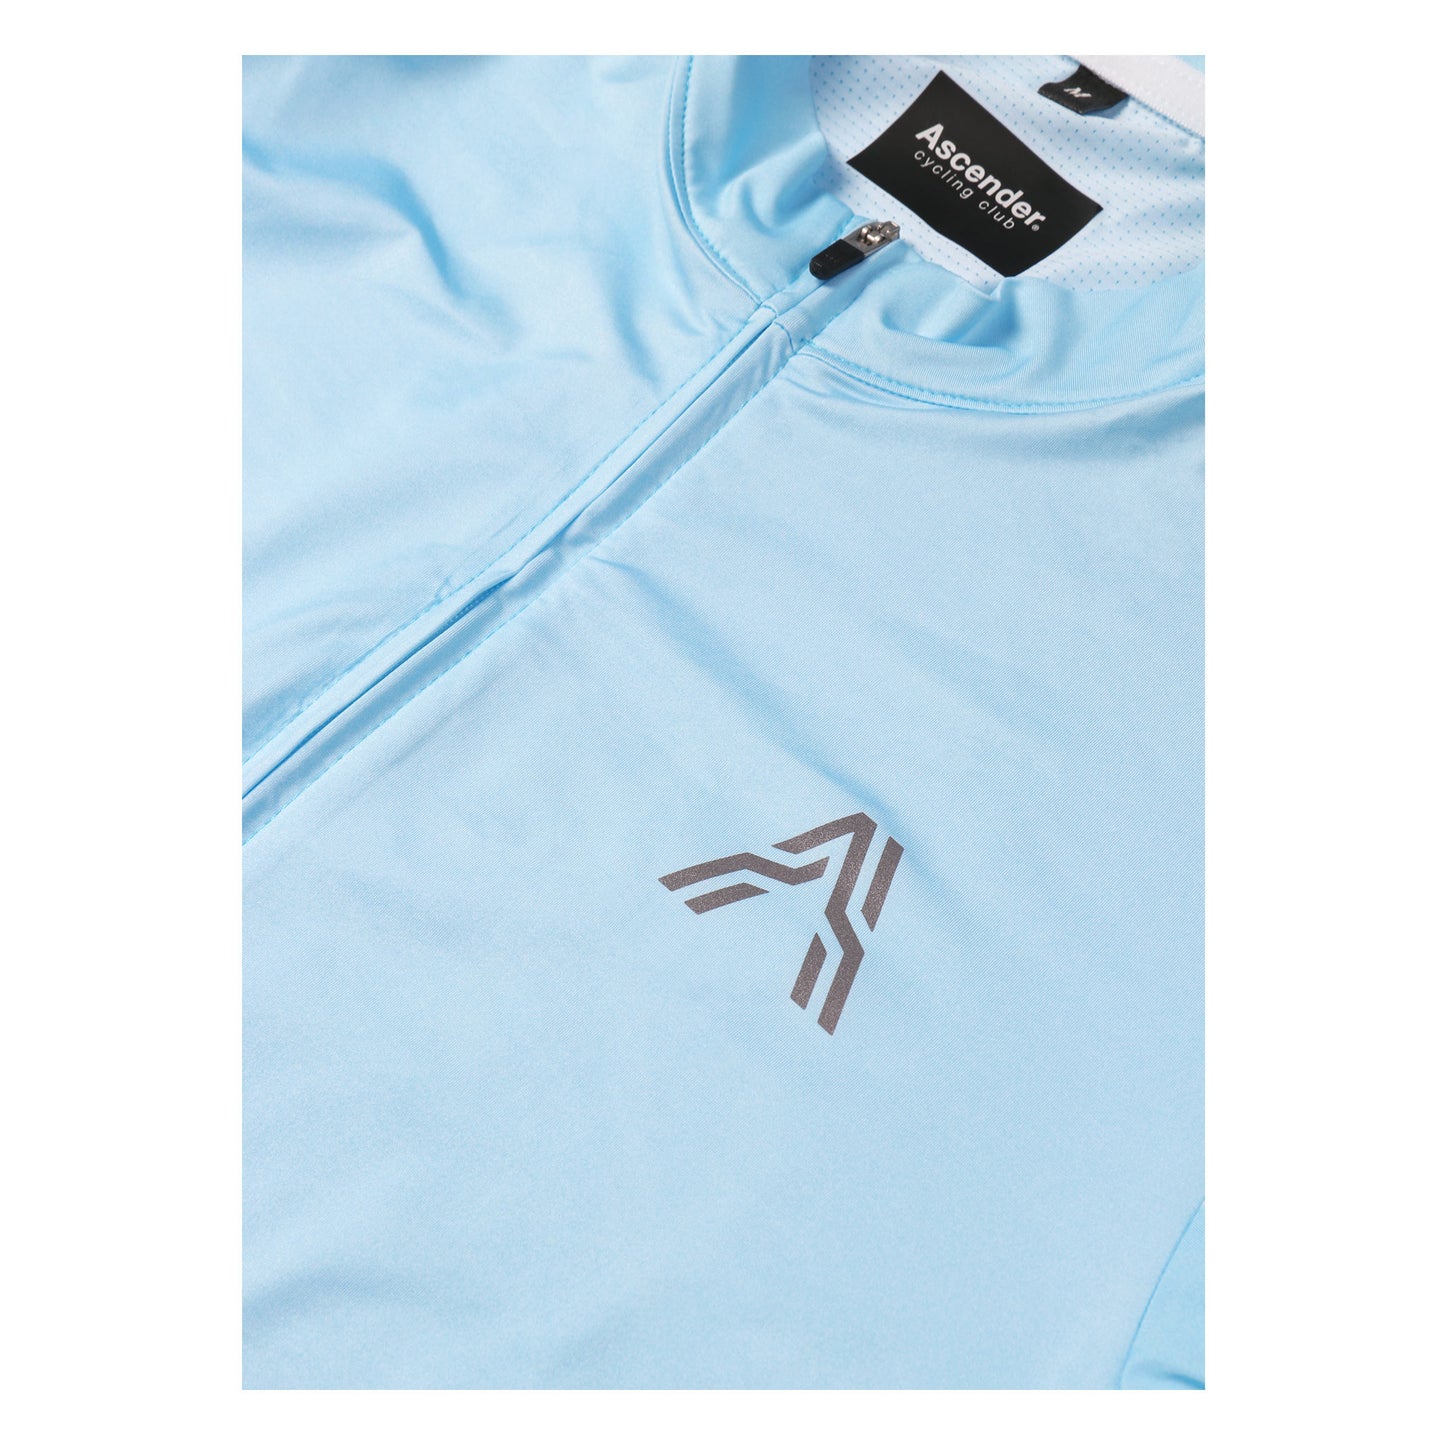 The retro-inspired Astro jersey Sky Blue from Ascender Cycling Club Switzerland Frontside View & Reflective Logo